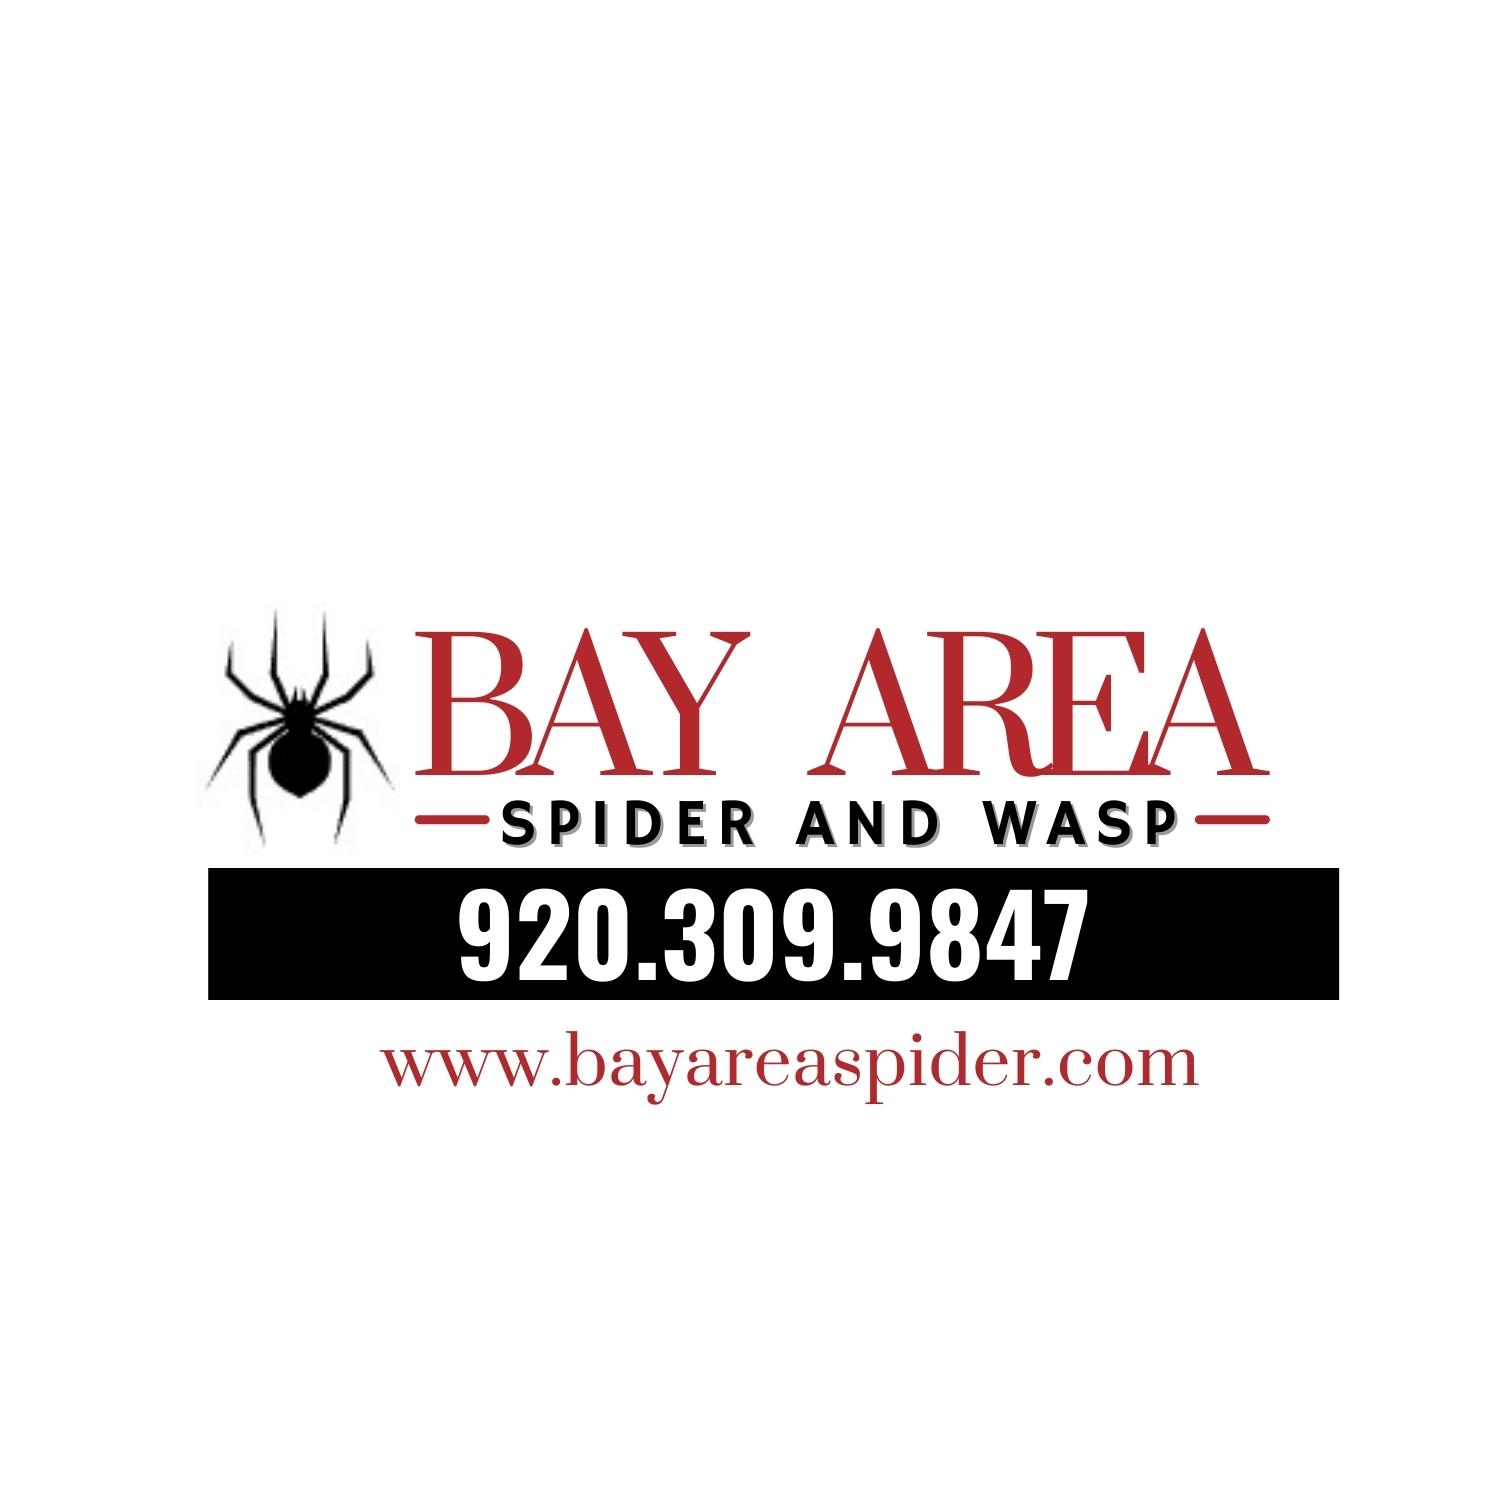 Bay Area Spider and Wasp